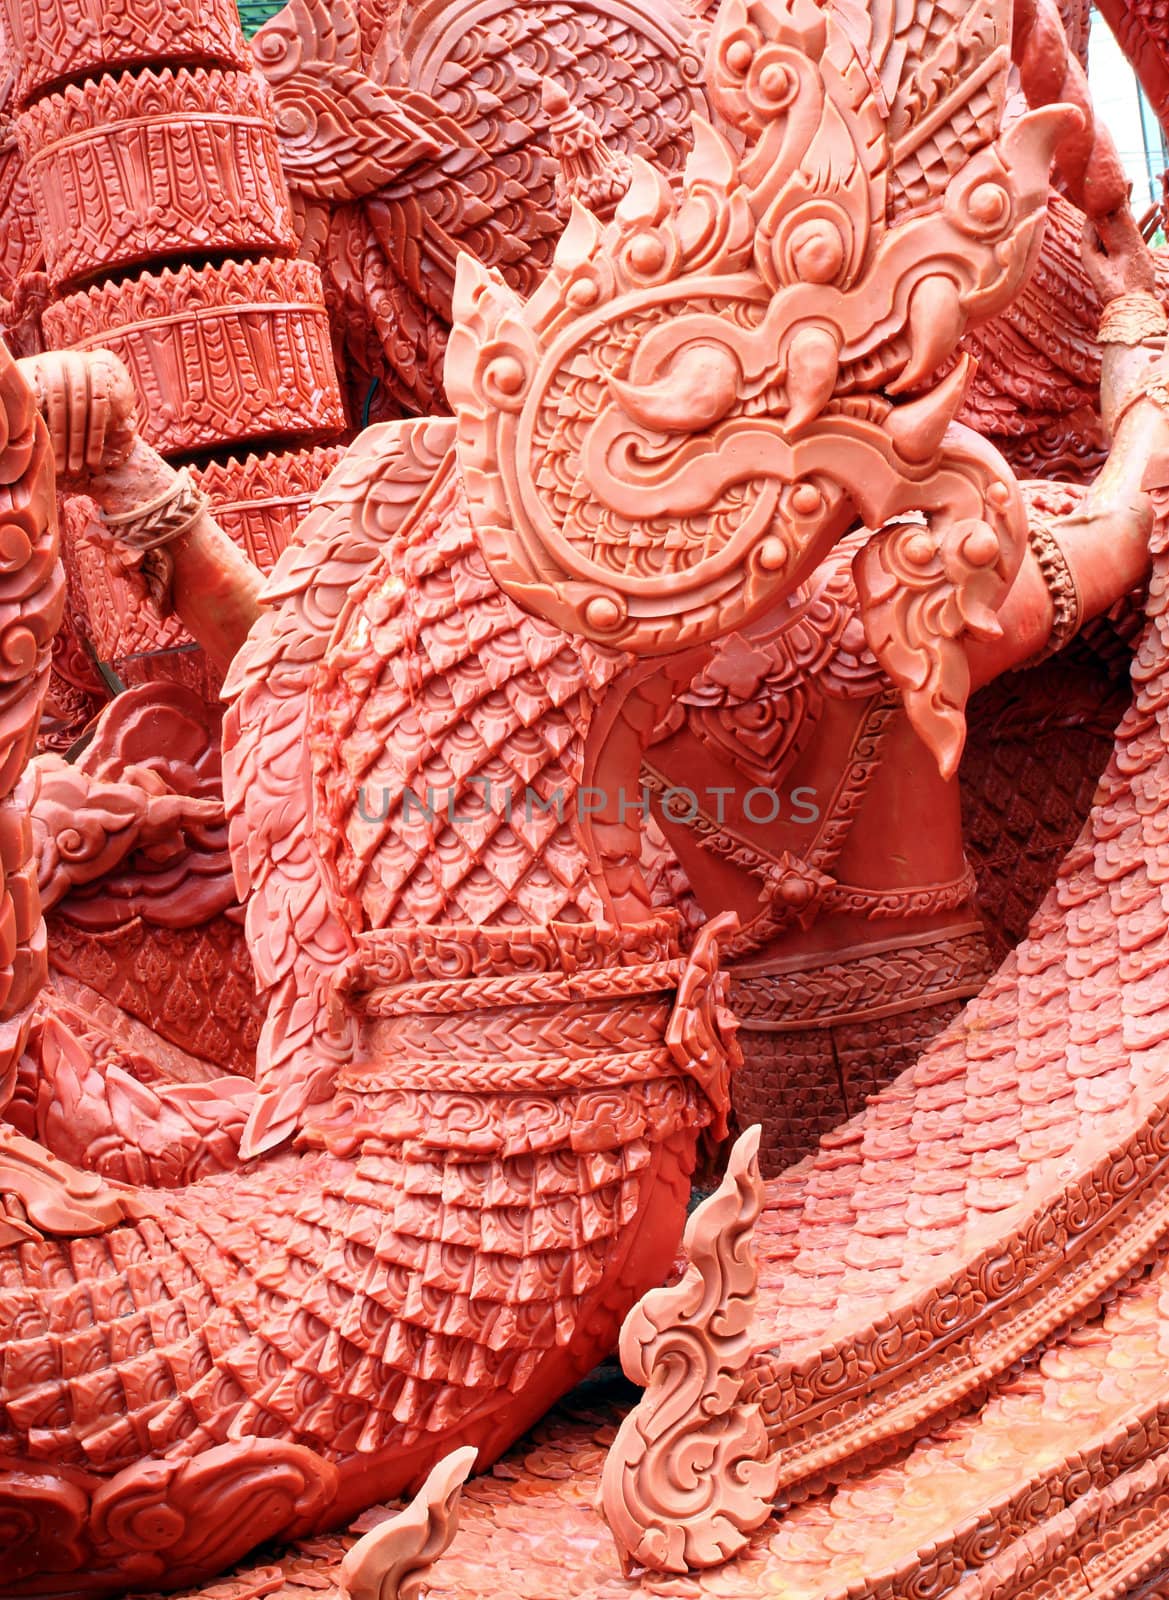 King of Naga carving candle festival by geargodz